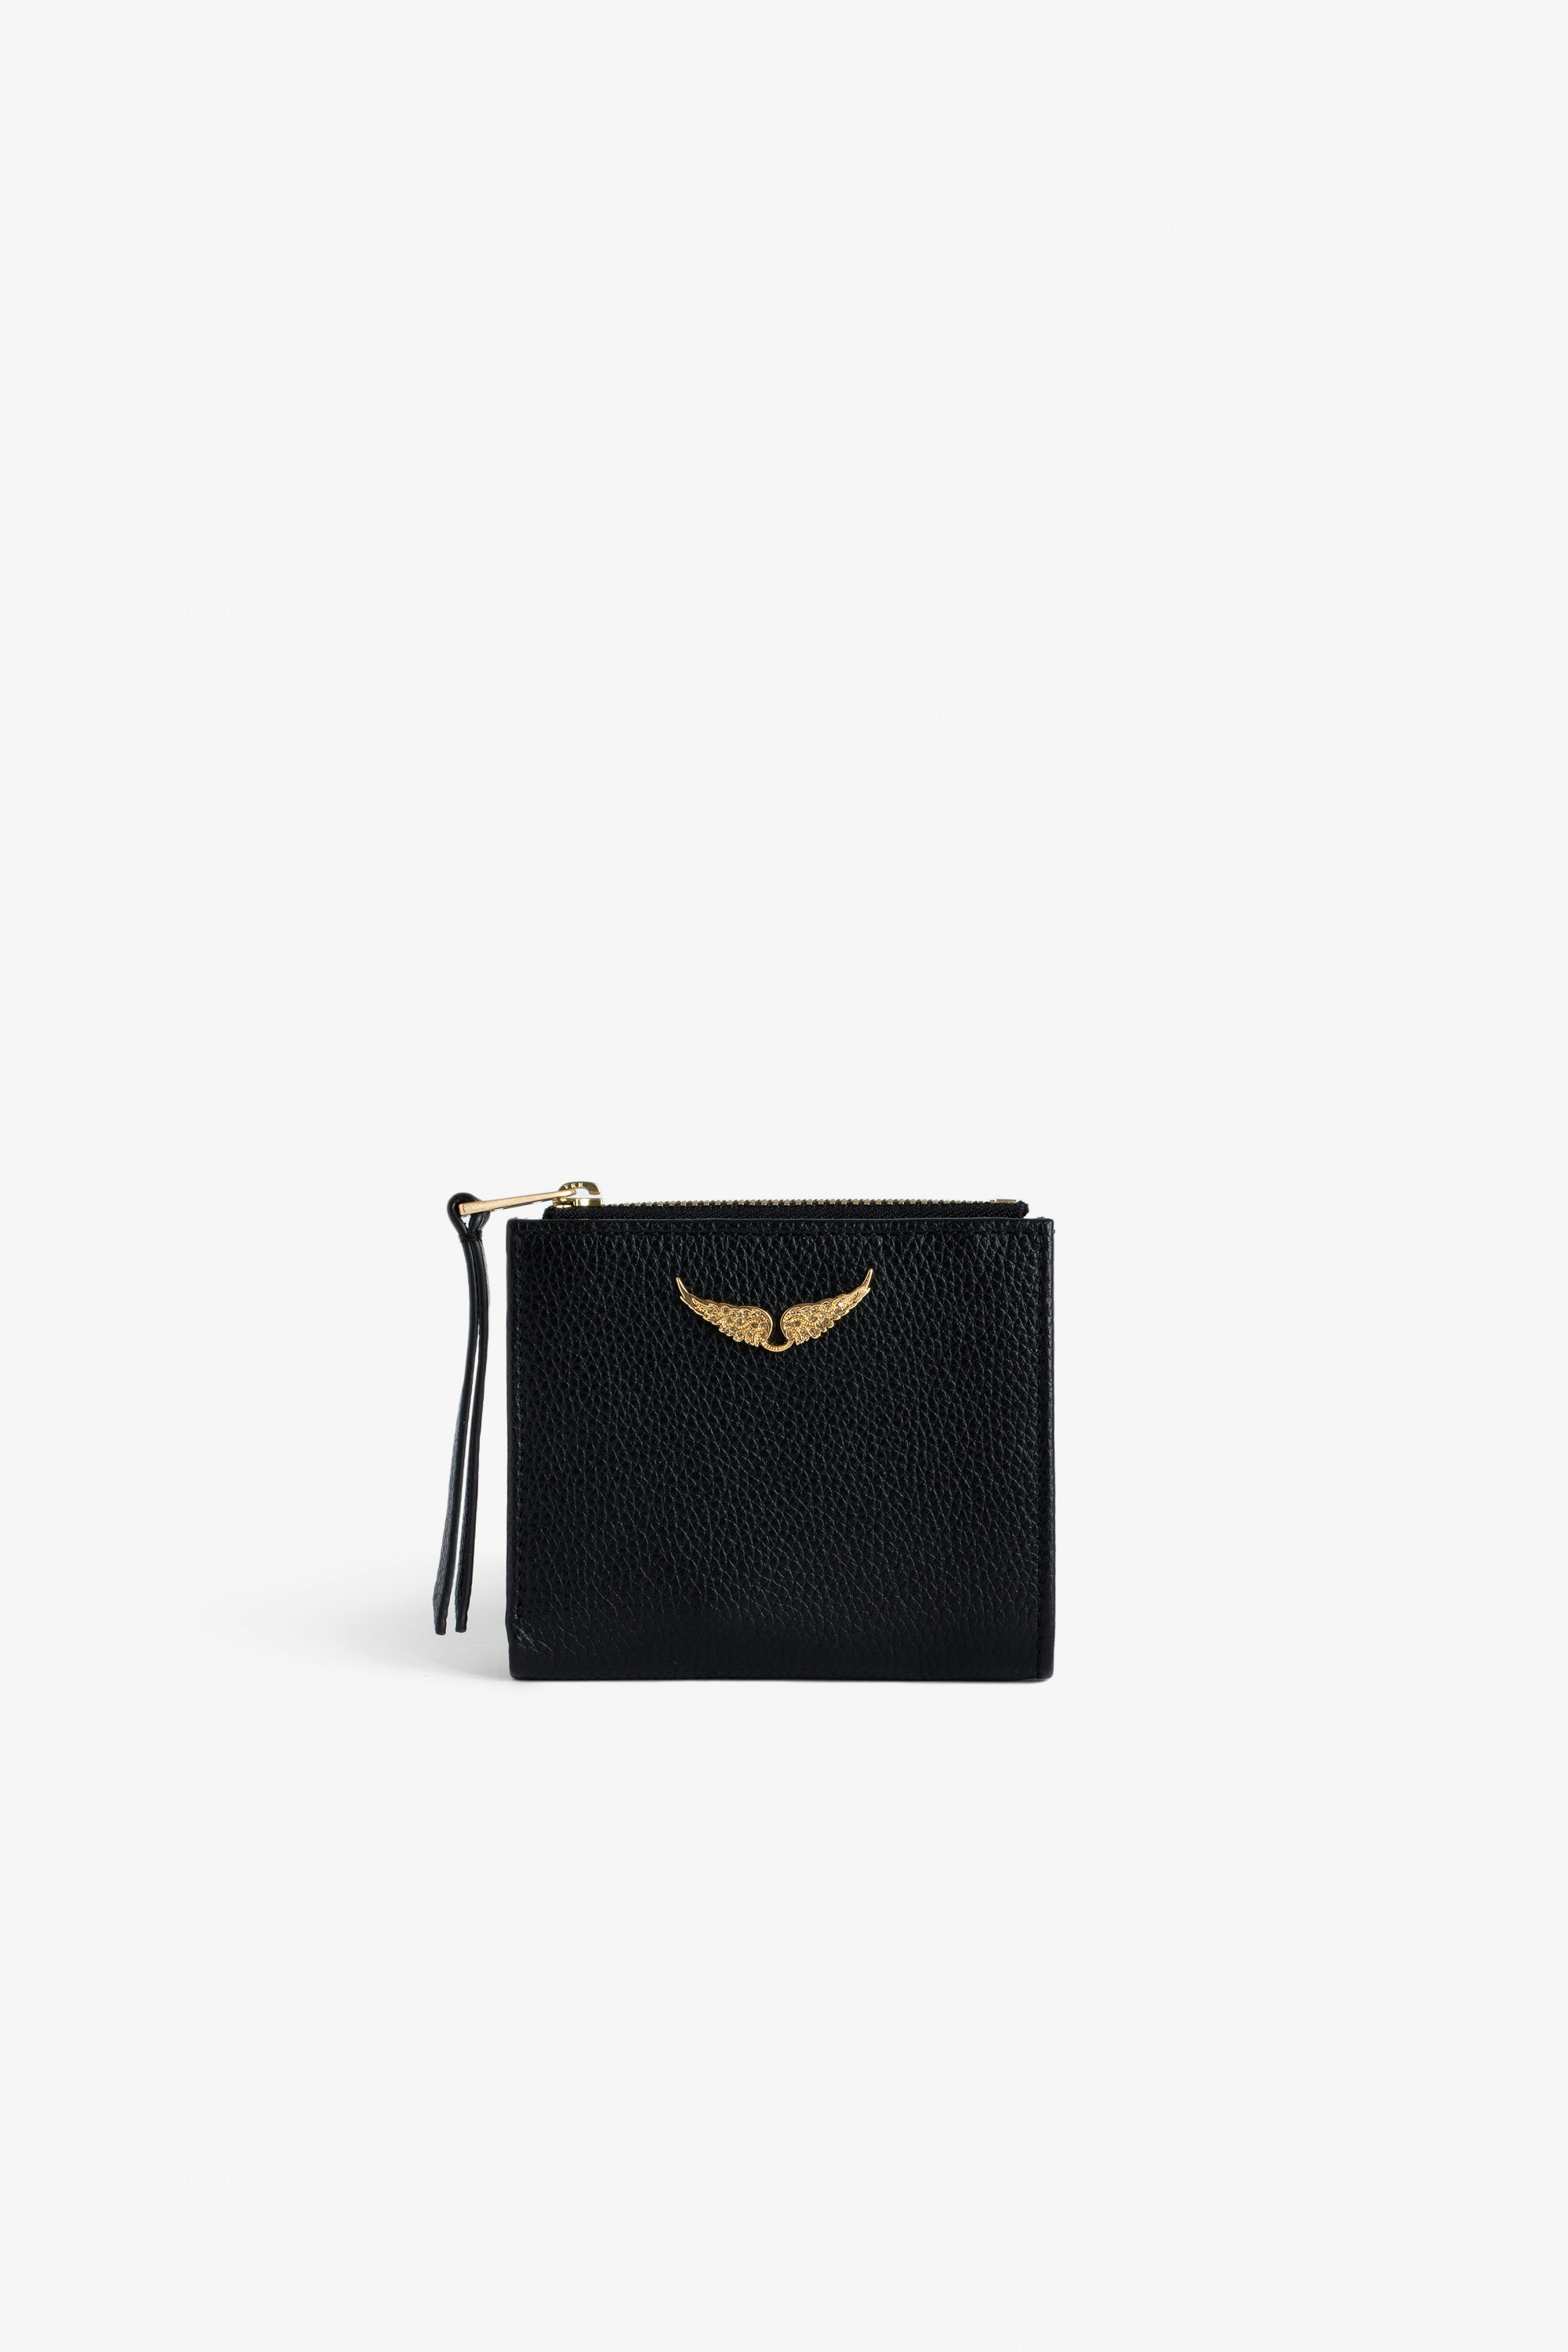 ZV Fold Coin Purse Women’s black grained leather coin purse with gold-tone diamanté wings charm.